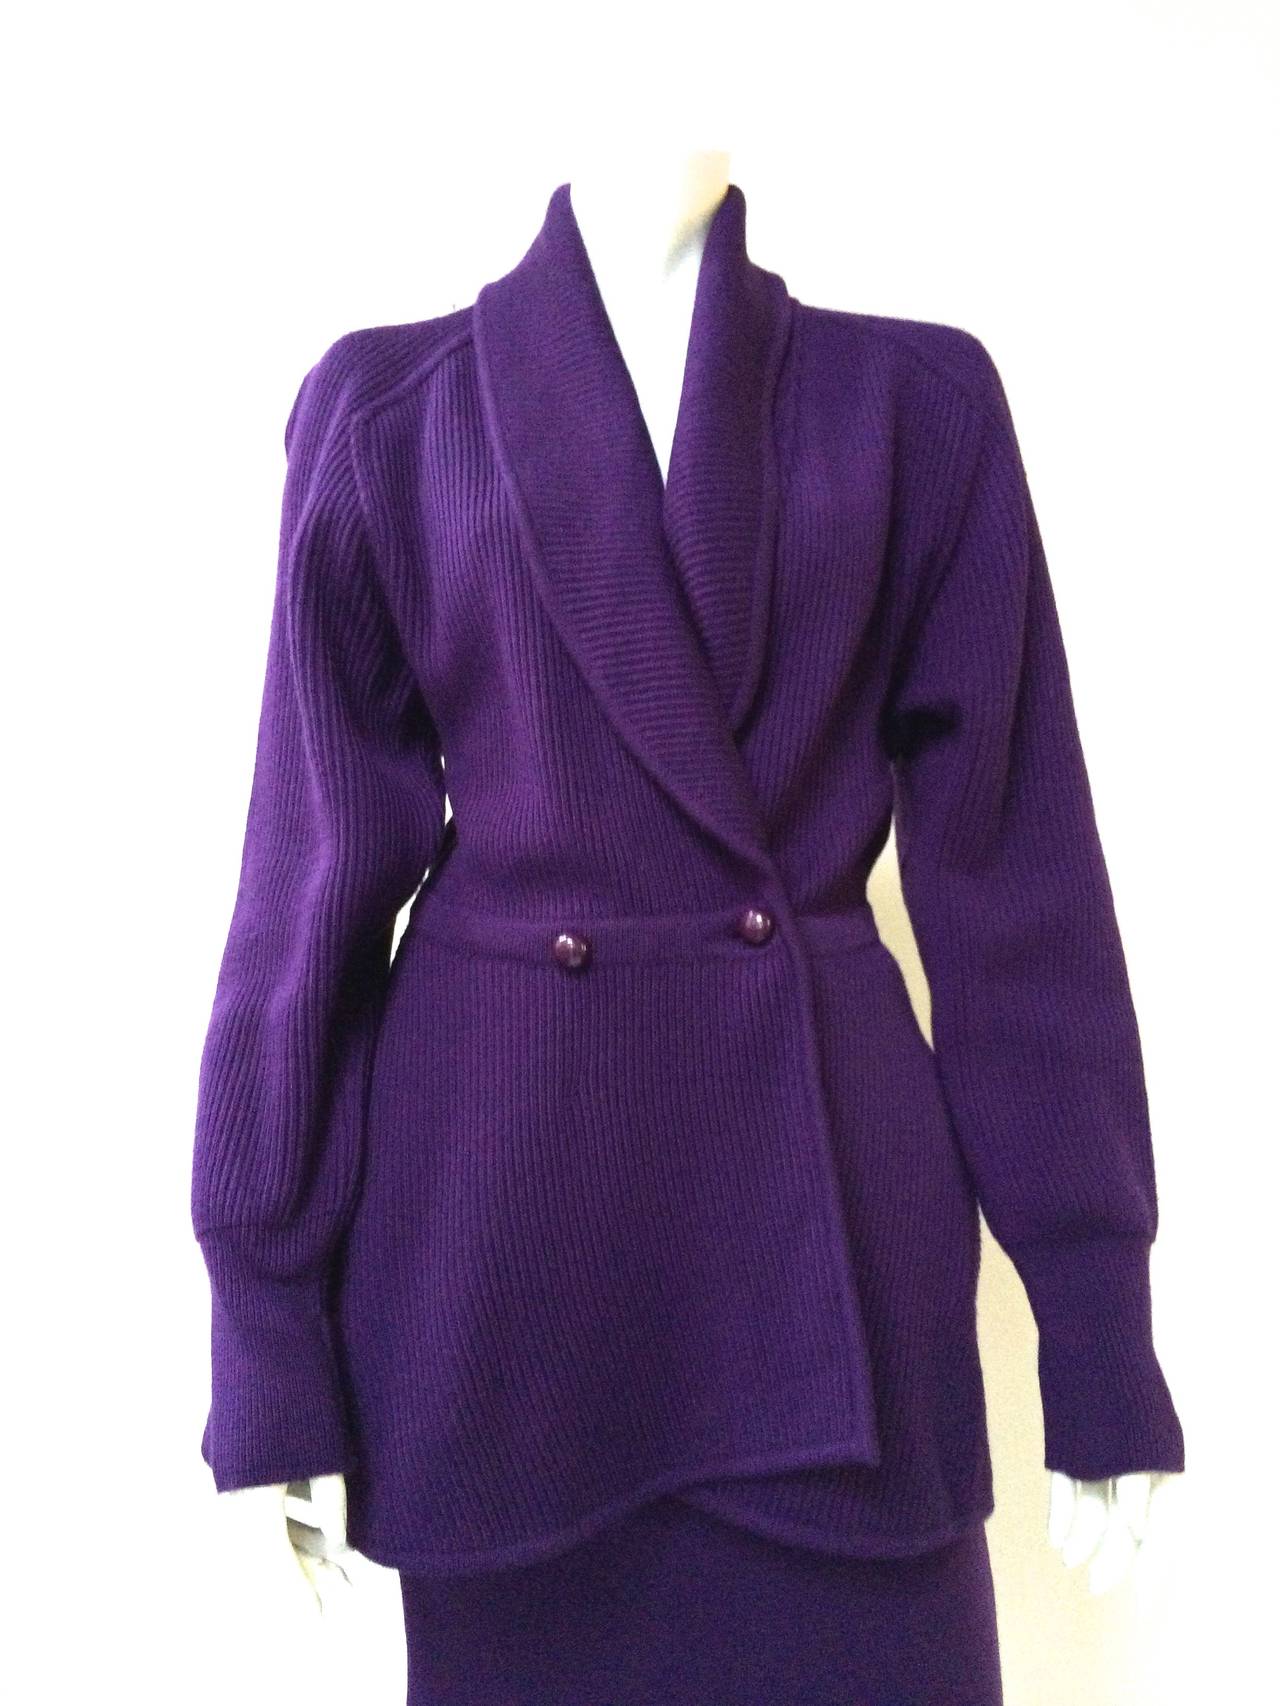 Karl Lagerfeld 80s 2 piece wool knit jacket & skirt made in Italy.  Jacket is size 40 and skirt is size 44, but please see measurements. Mannequin is size 4 and it fits perfectly. This impeccable wool knit 2 piece set is timeless but it is what you